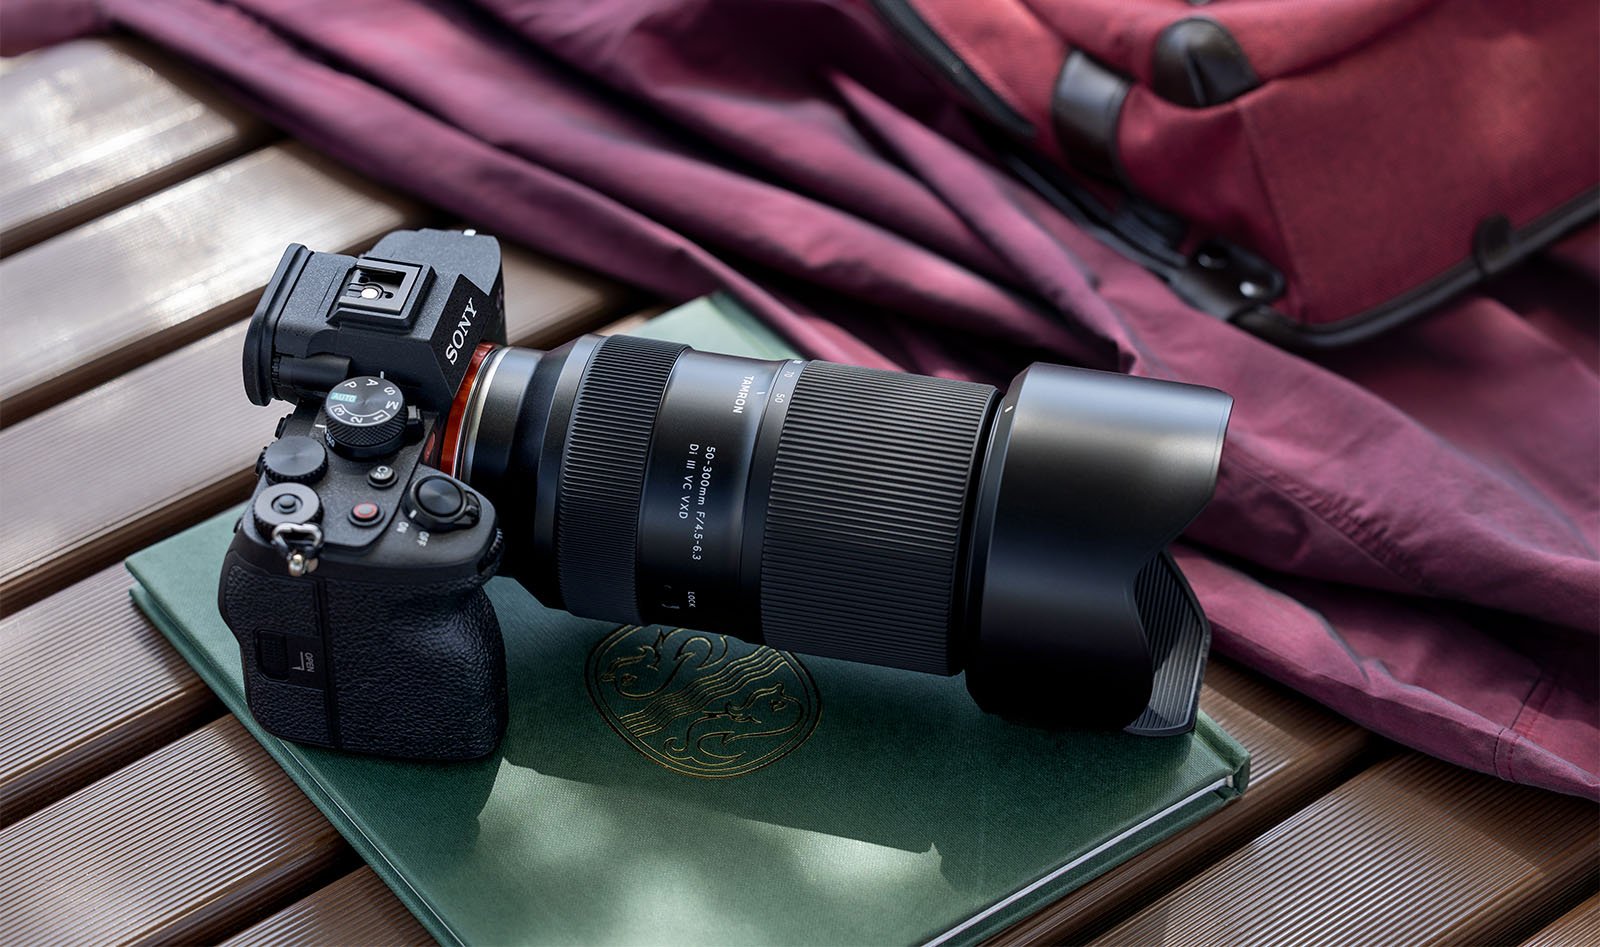 A professional camera with a large lens is placed on a green hardcover book with a crest on the cover. The camera and book rest on a brown wooden surface, and there is a maroon fabric background. A maroon bag partially appears in the background.